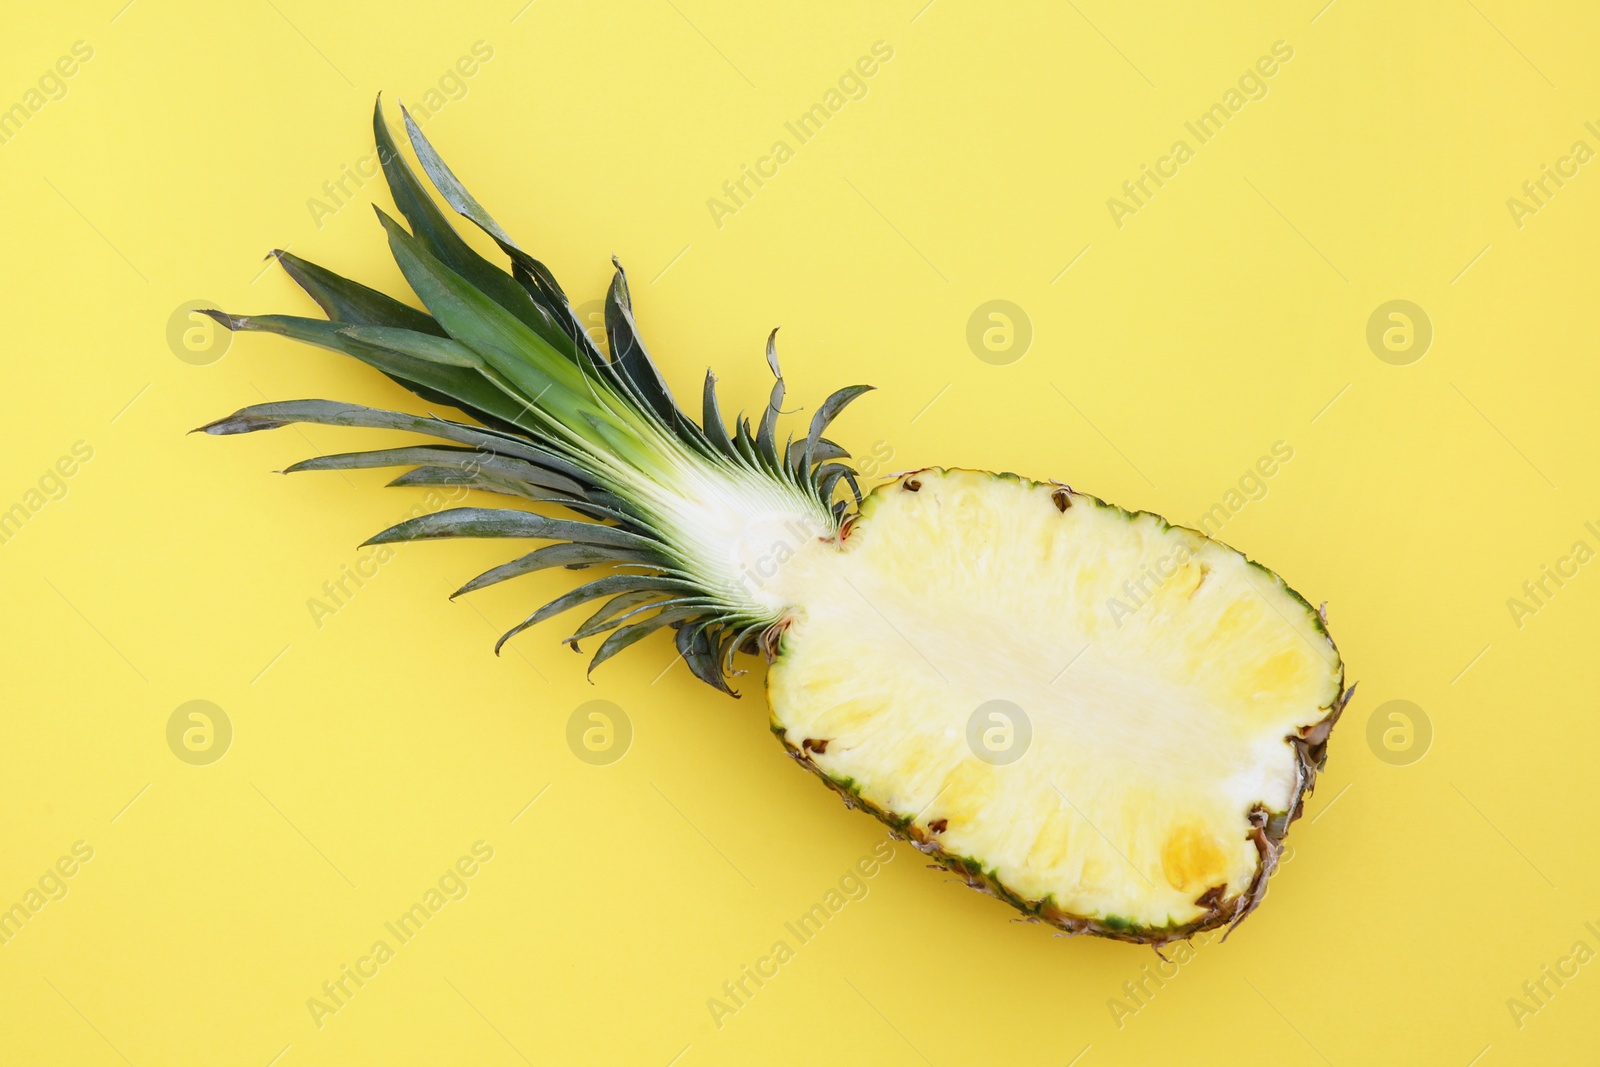 Photo of Half of ripe pineapple on yellow background, top view